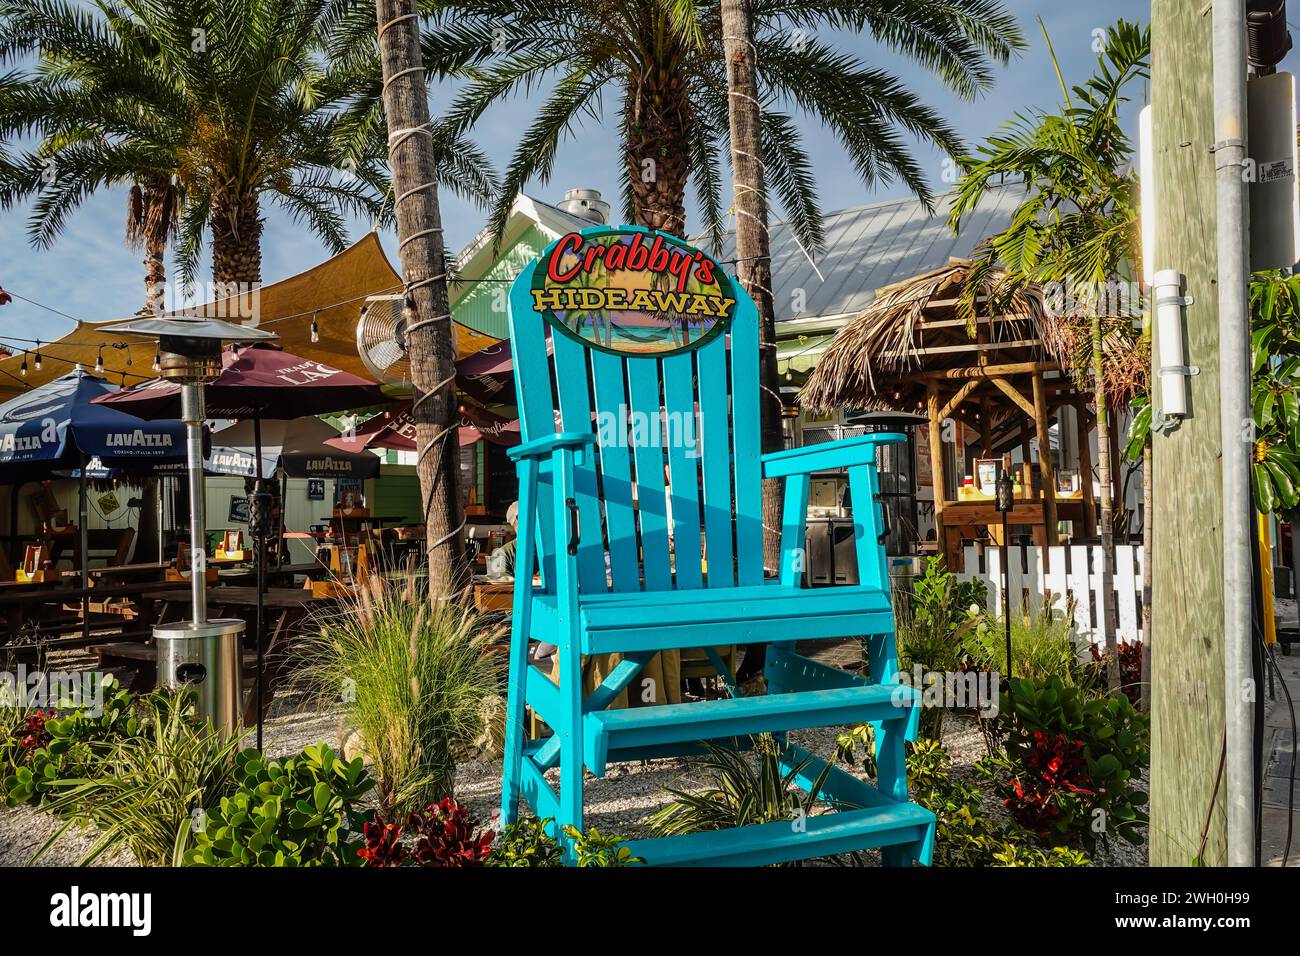 Crabby's Hideaway sur Papaya Street, Clearwater, Floride Banque D'Images